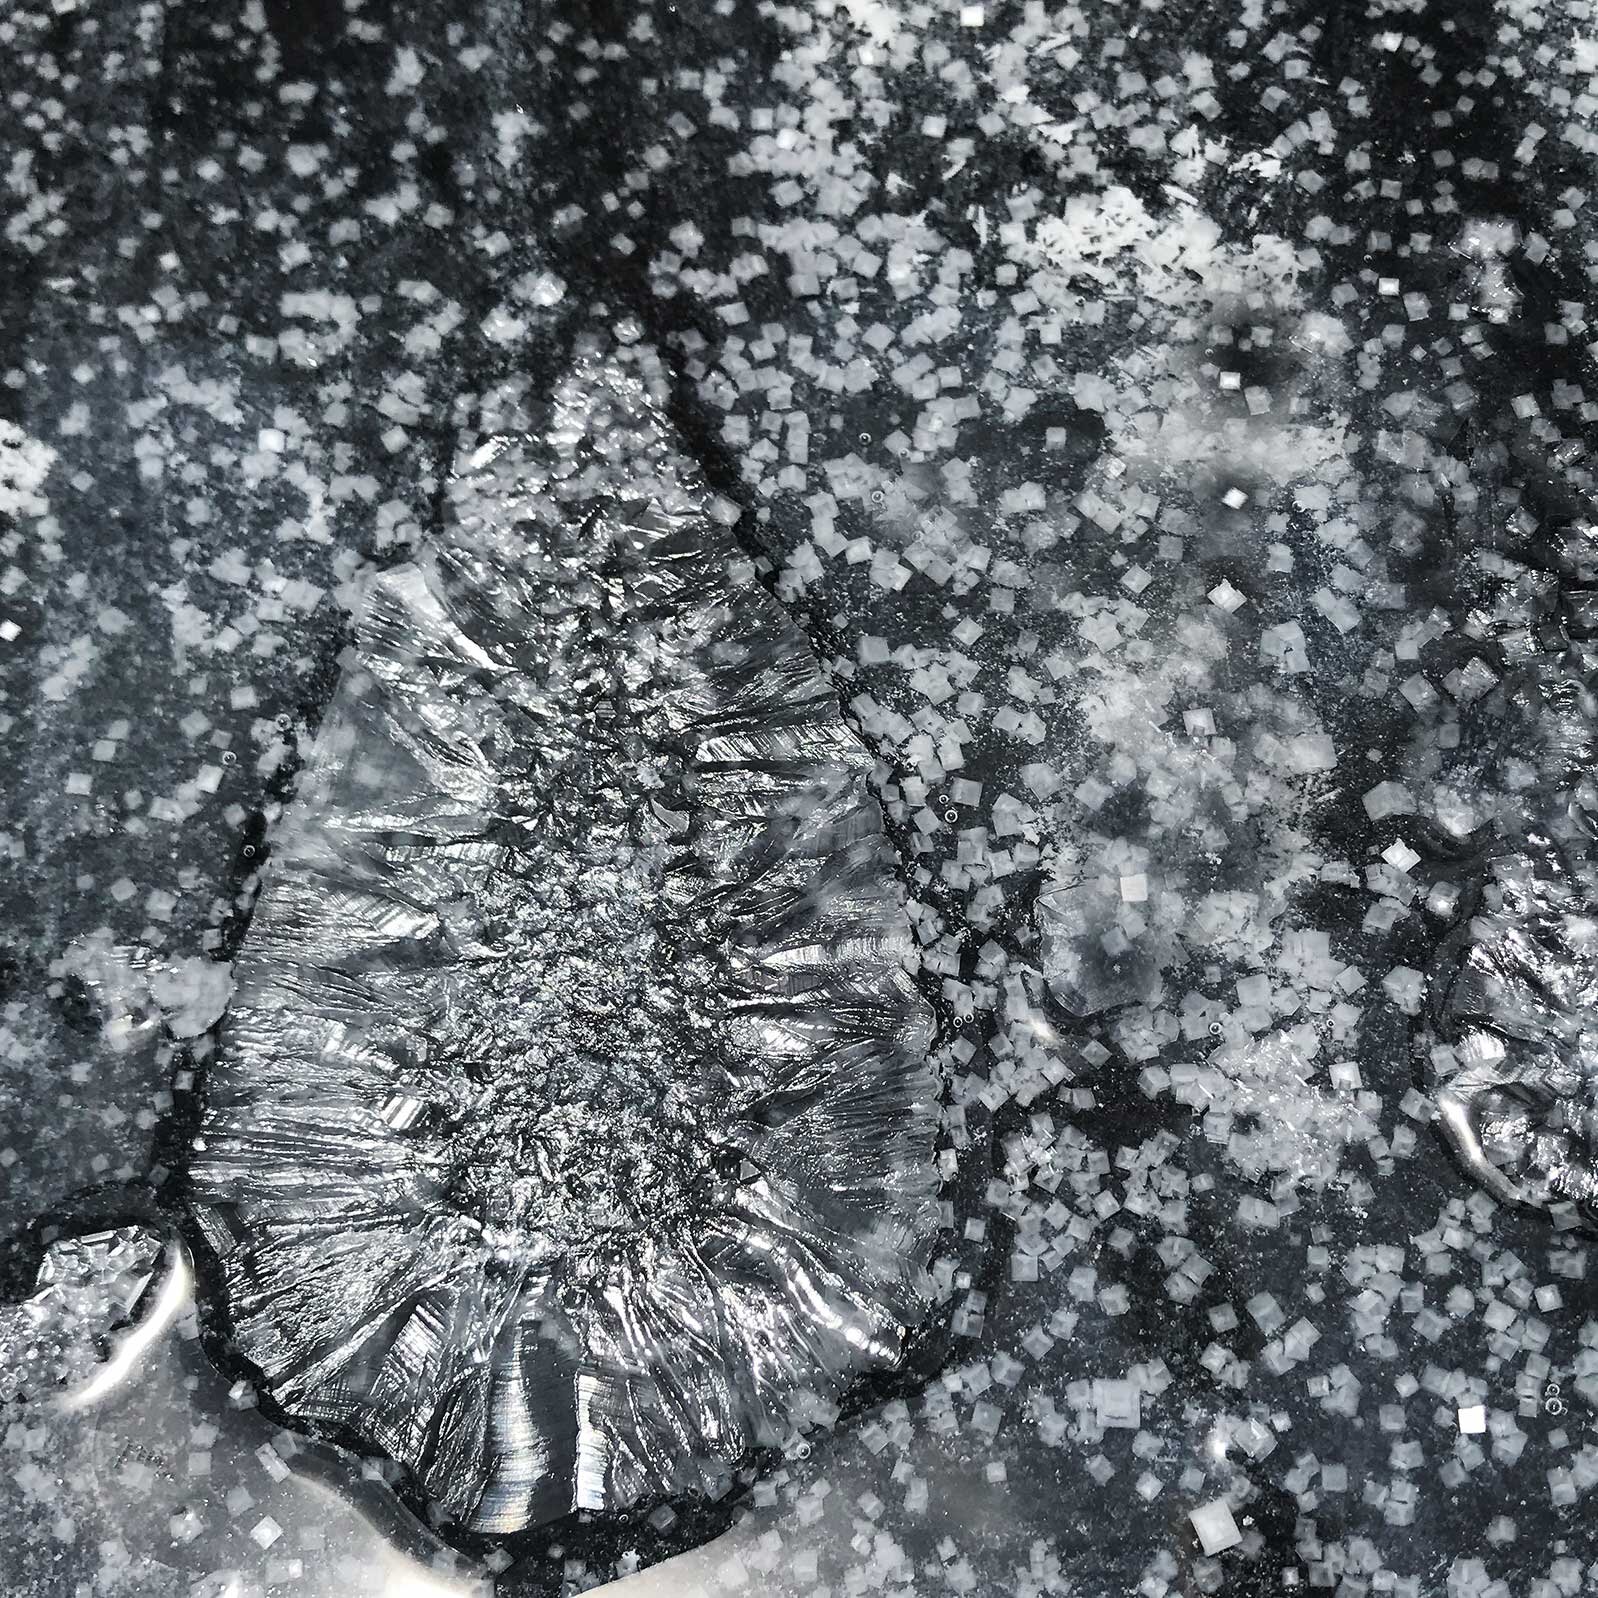 Sea salt starting to crystalize from sea water